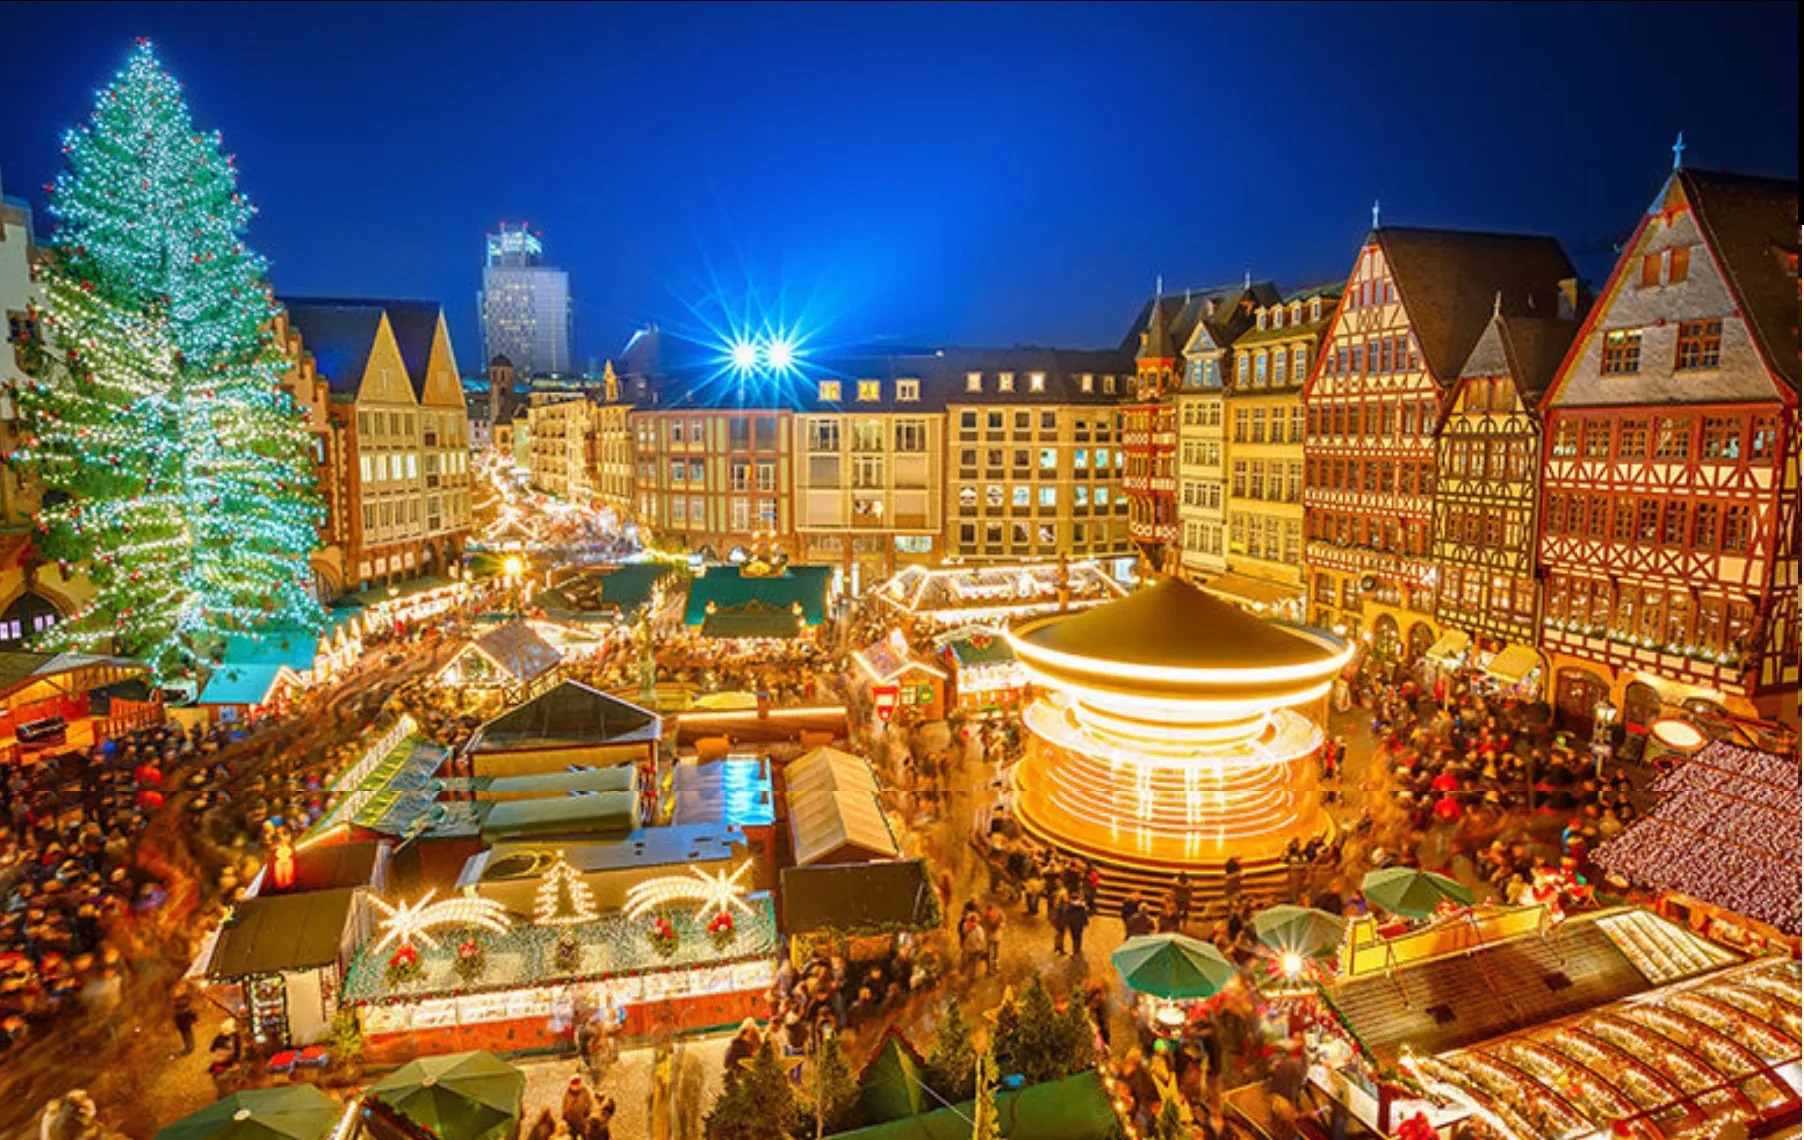 Guide(e) to European Christmas Markets: Unwrapping the Best Three Gems